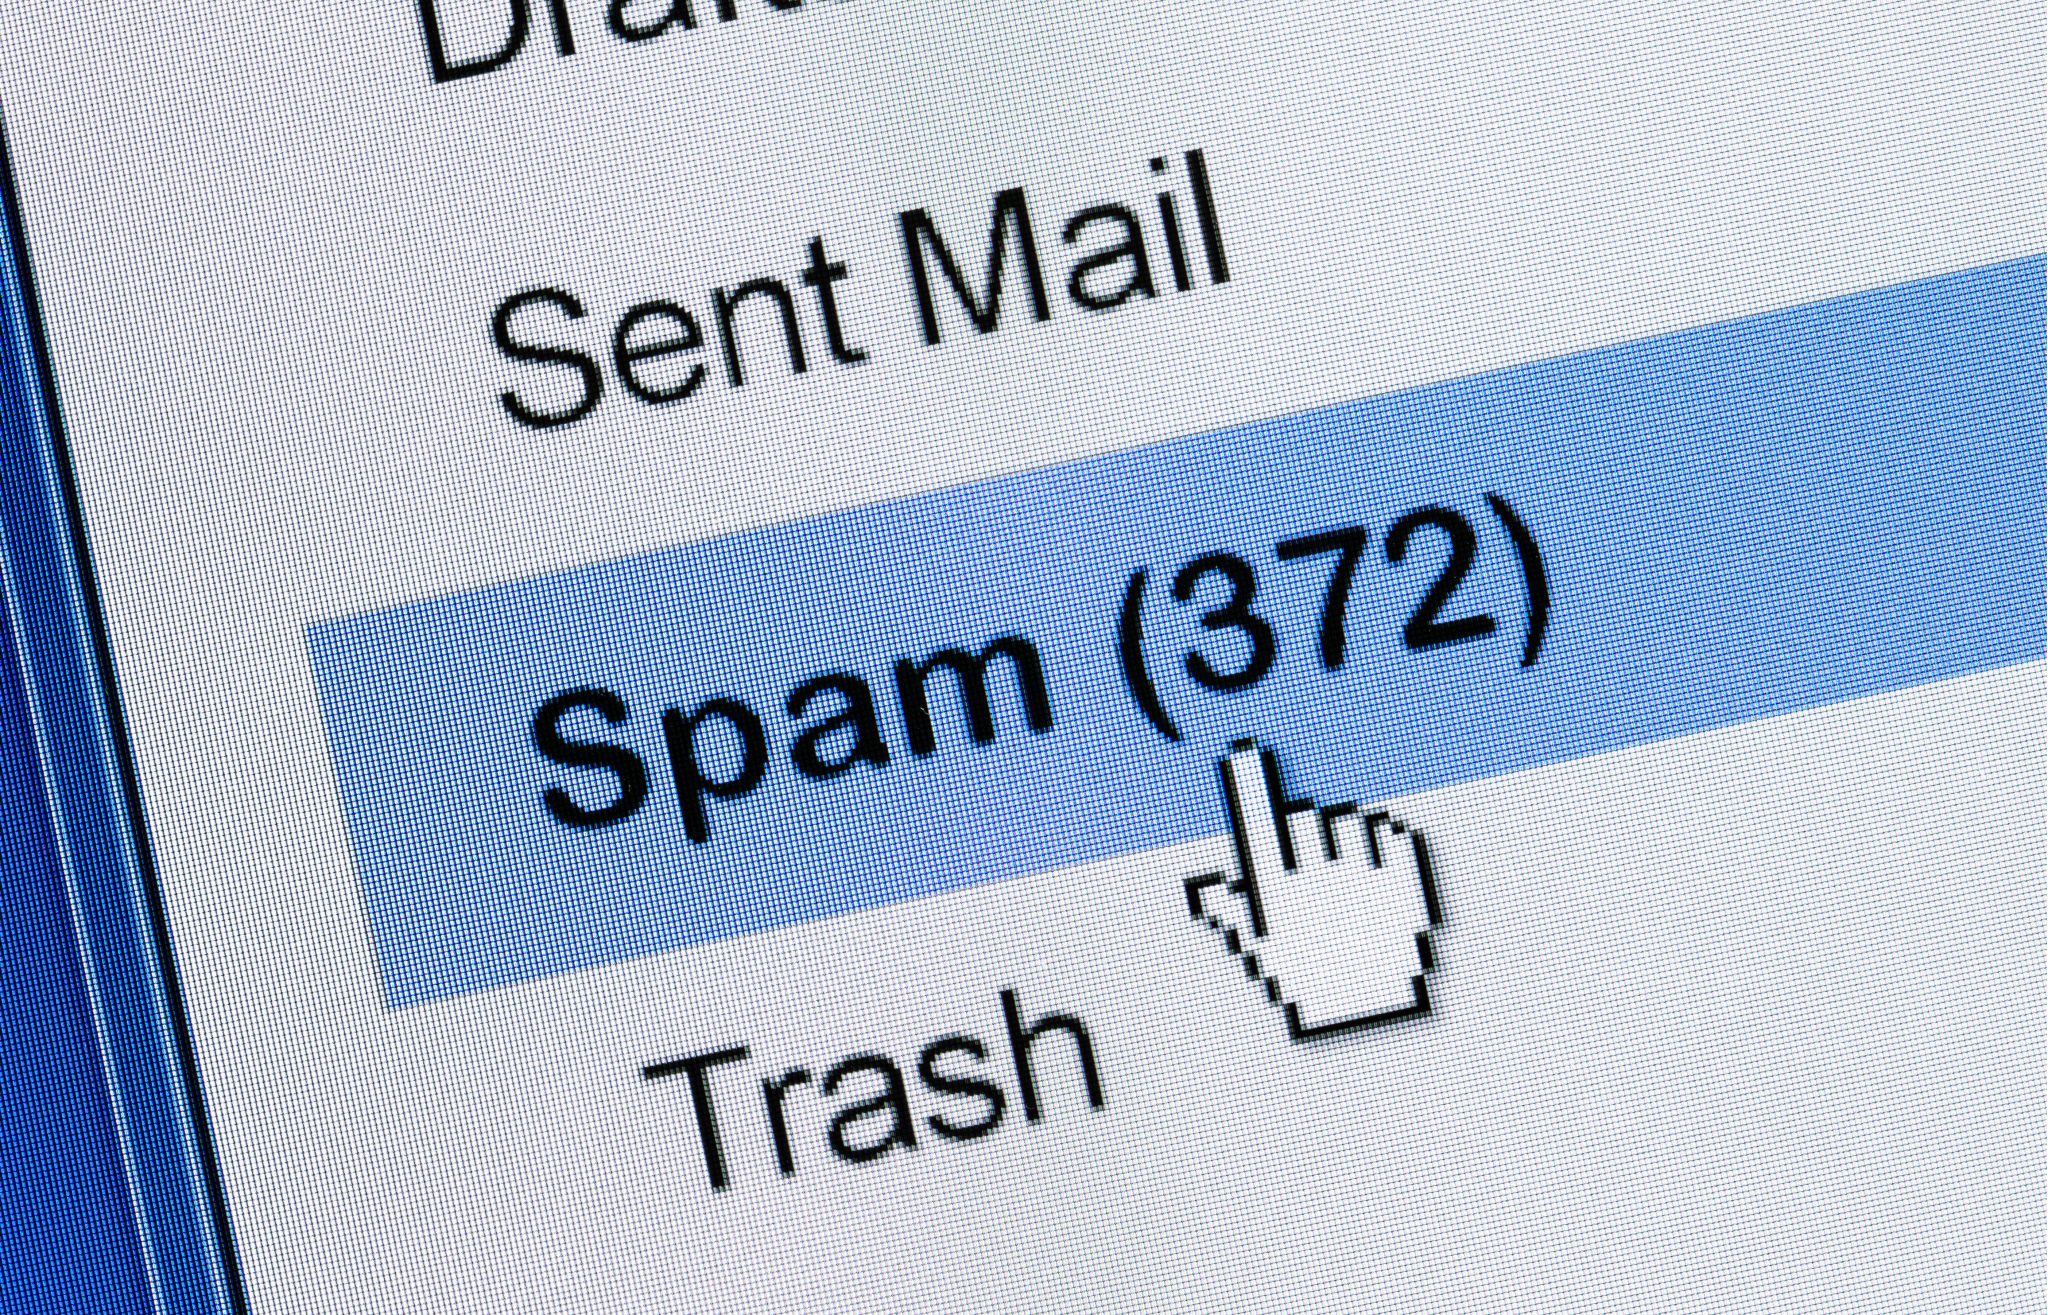 Read more on SPAM Filtering Requirements from Google and Yahoo: The Crucial Role of DMARC, DKIM, and SPF in Ensuring Email Security and Deliverability